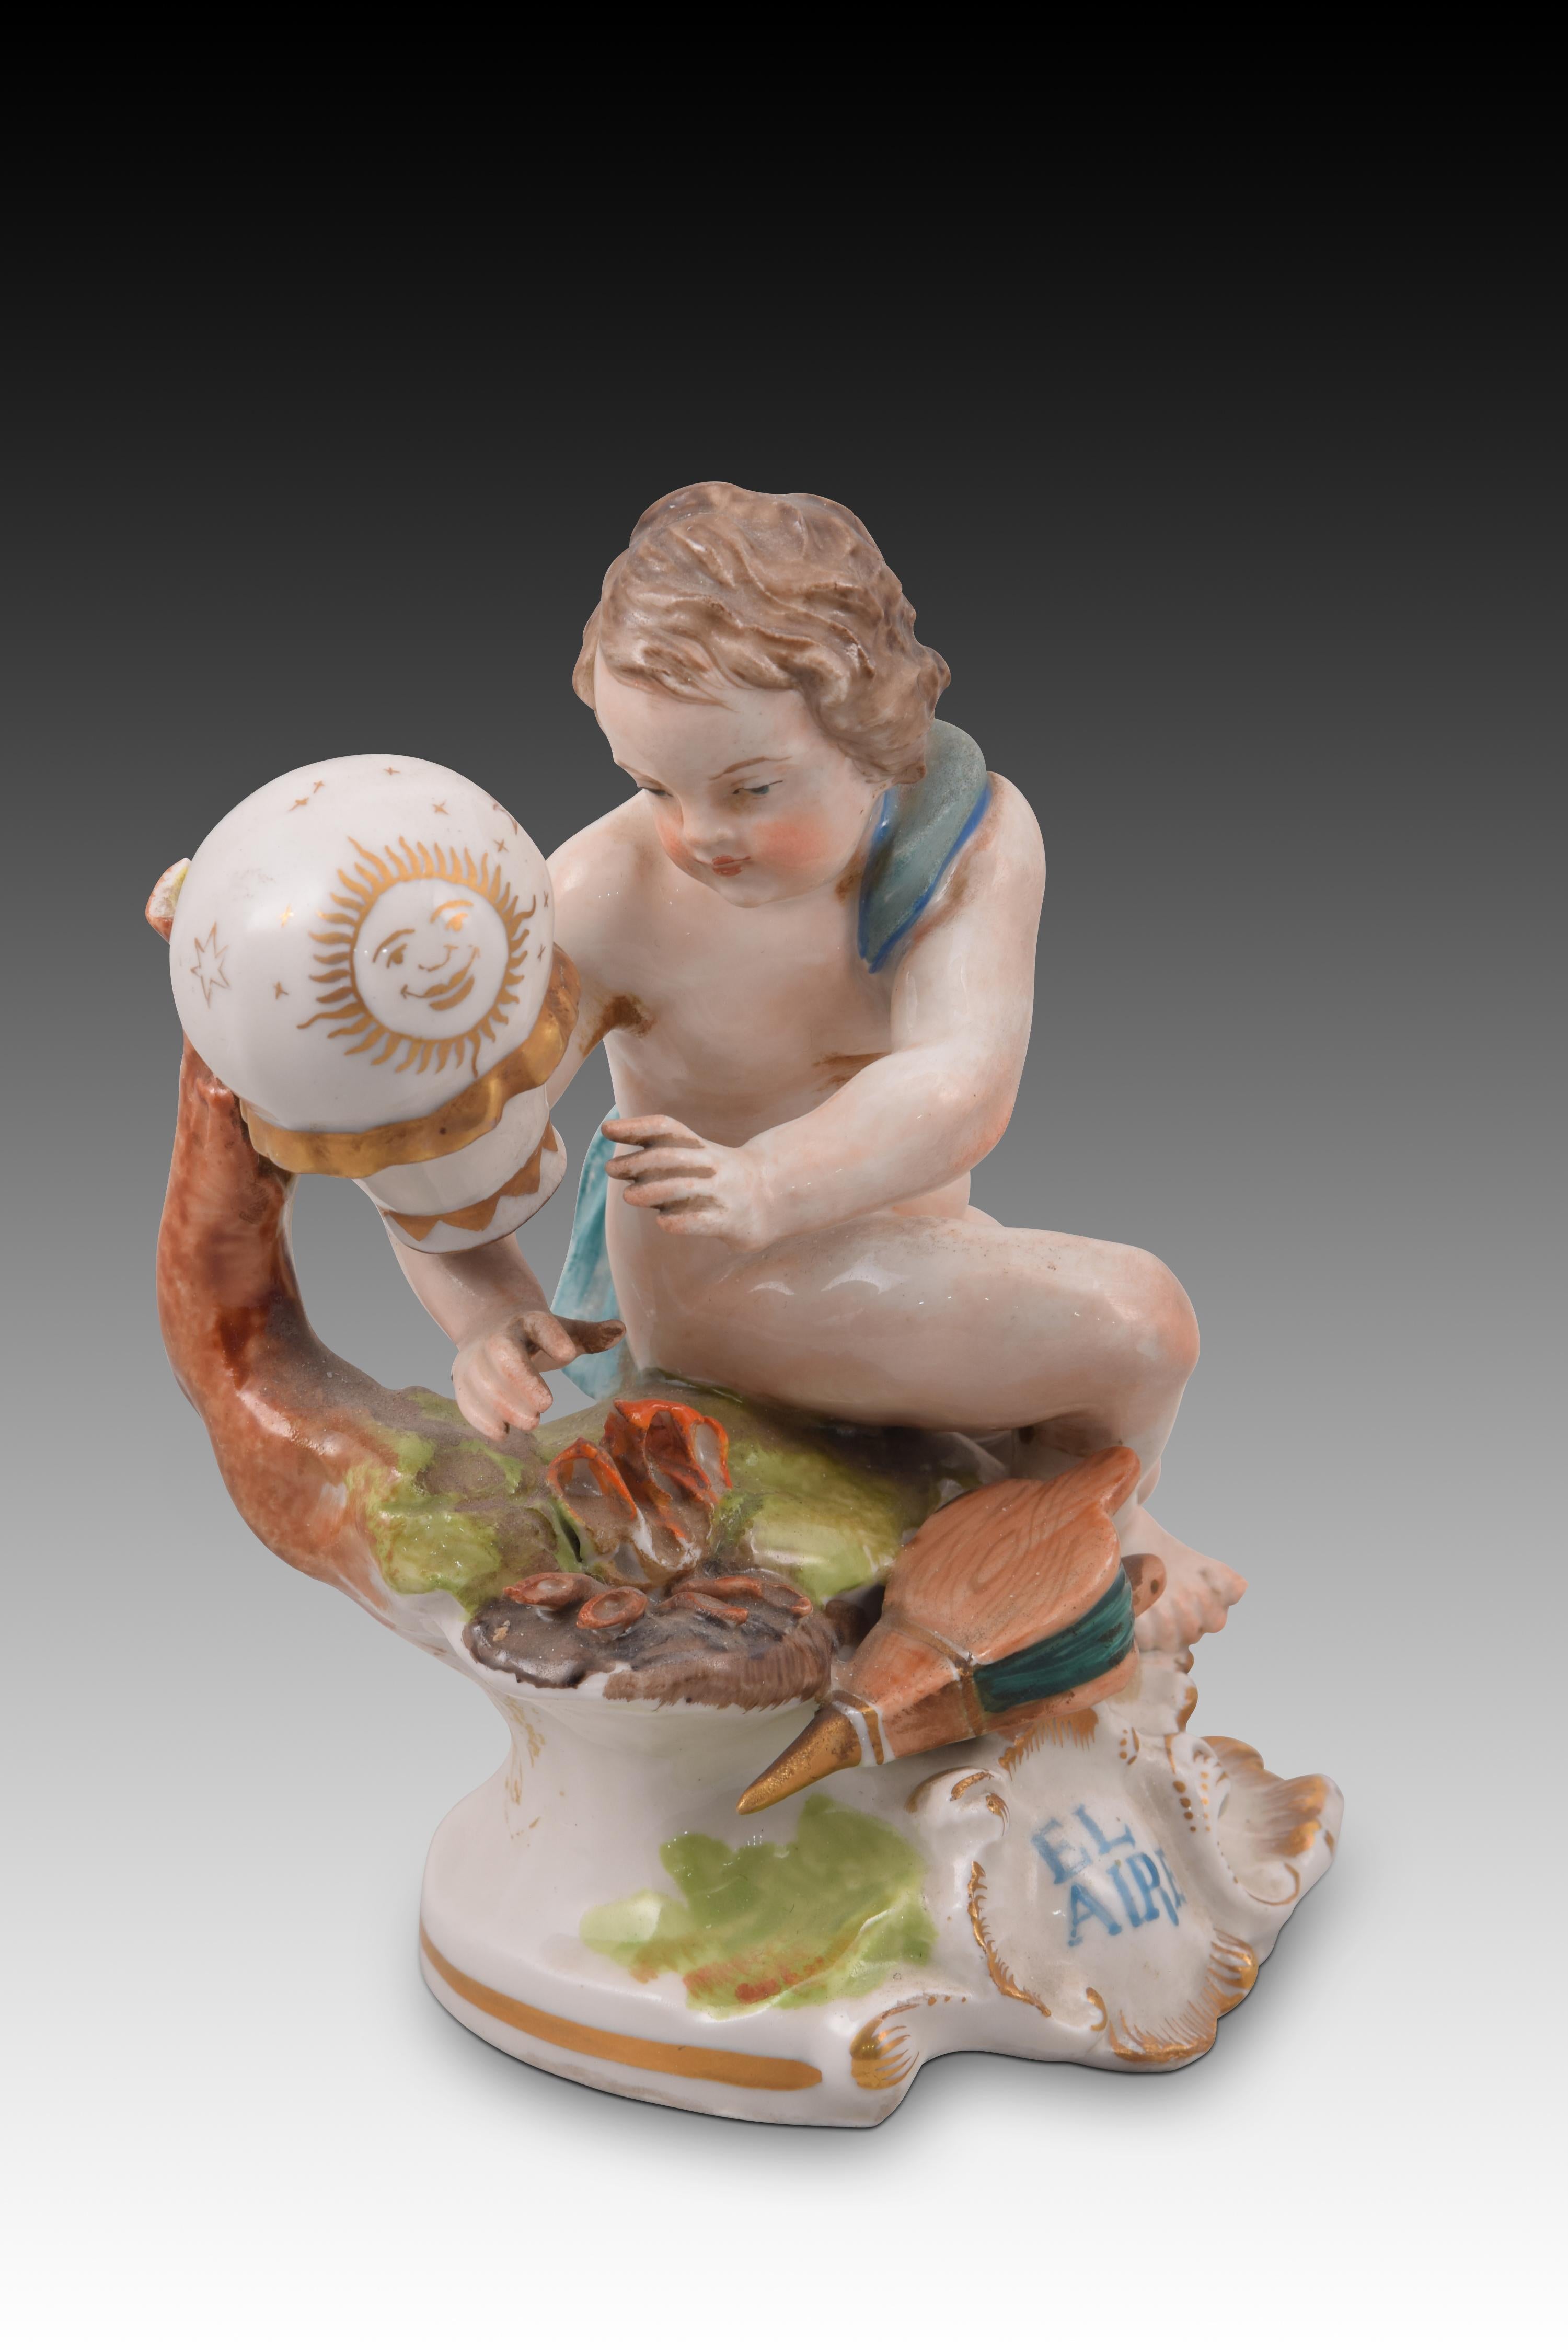 Allegory of the Air. Glazed porcelain. Hispania porcelain, Spain, 20th century. 
With marks.
Enameled porcelain figurine with touches of gold that shows a half-naked boy, with an old-style hot air balloon and a bellows, seated on a base of clear